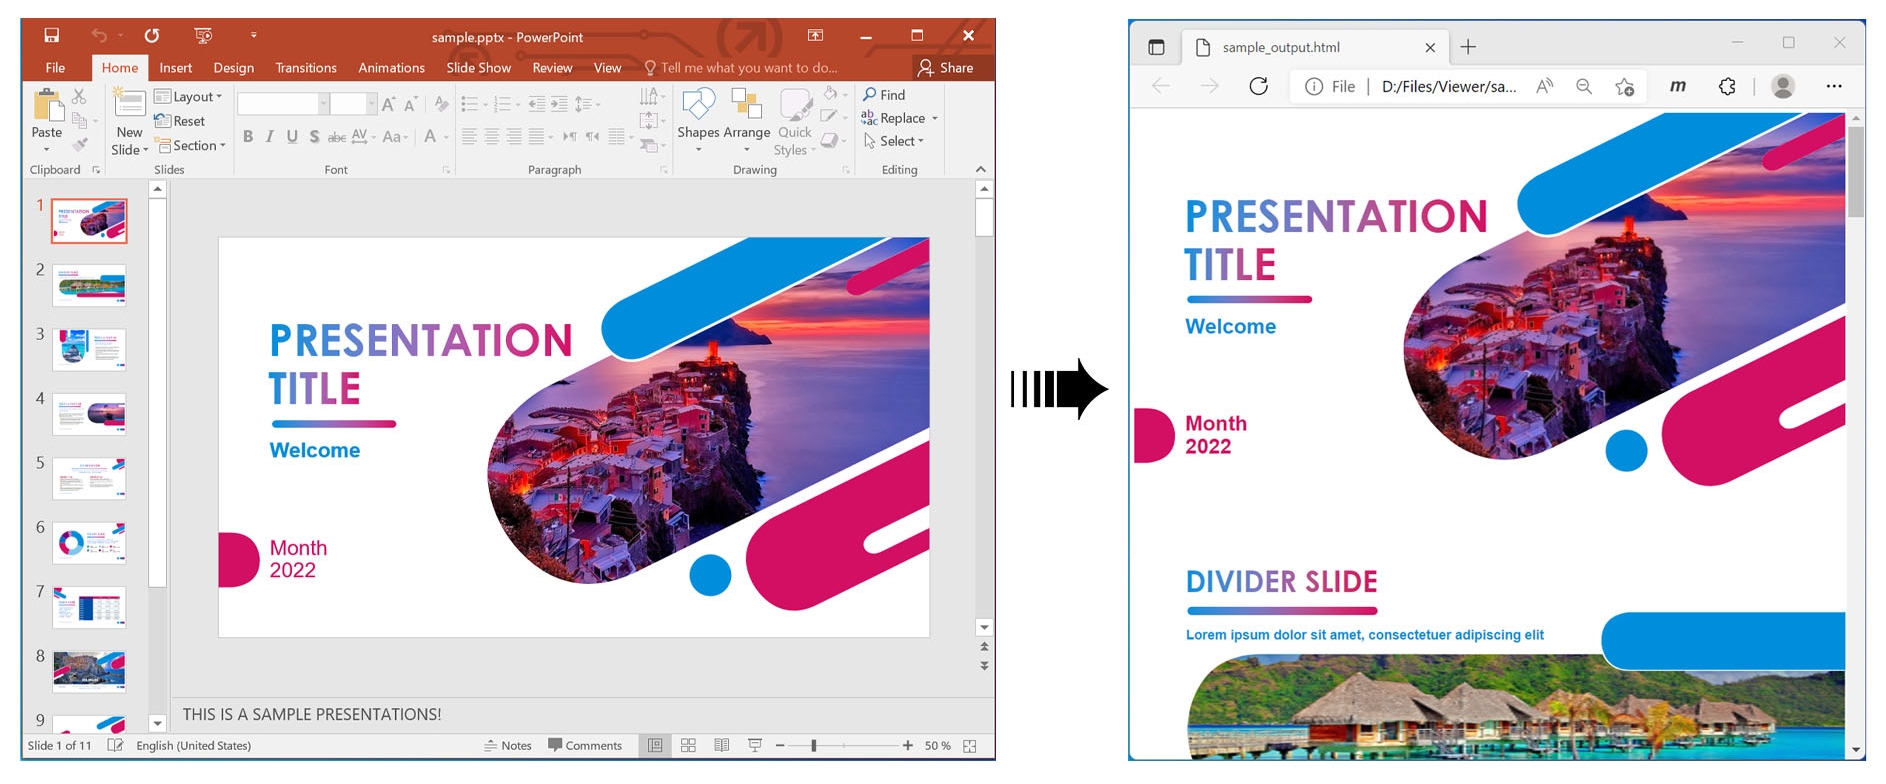 View PowerPoint Presentation in HTML using C#.